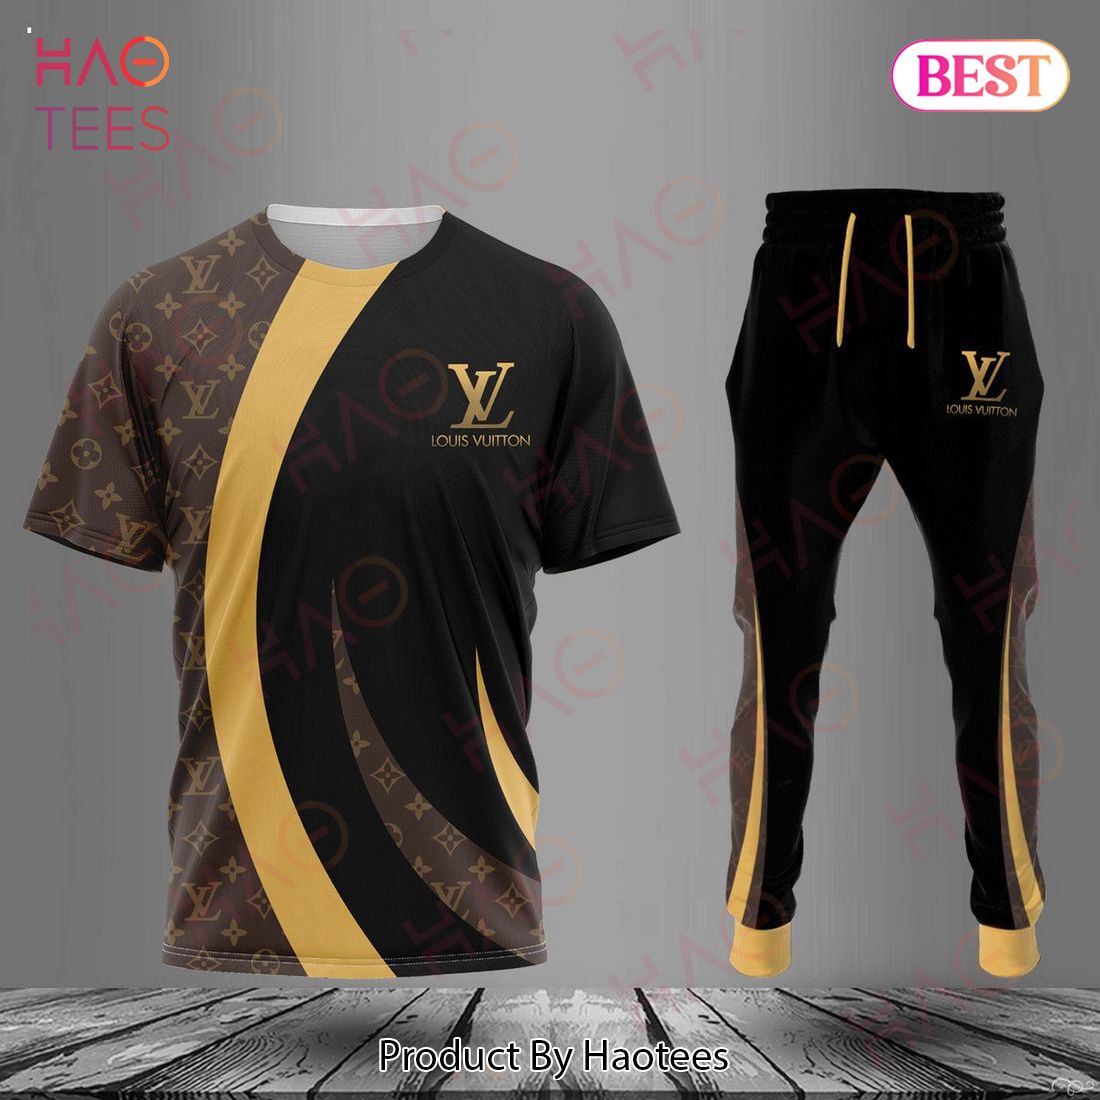 Louis Vuitton Black Brown Gold Luxury Brand T-Shirt And Pants Limited Edition